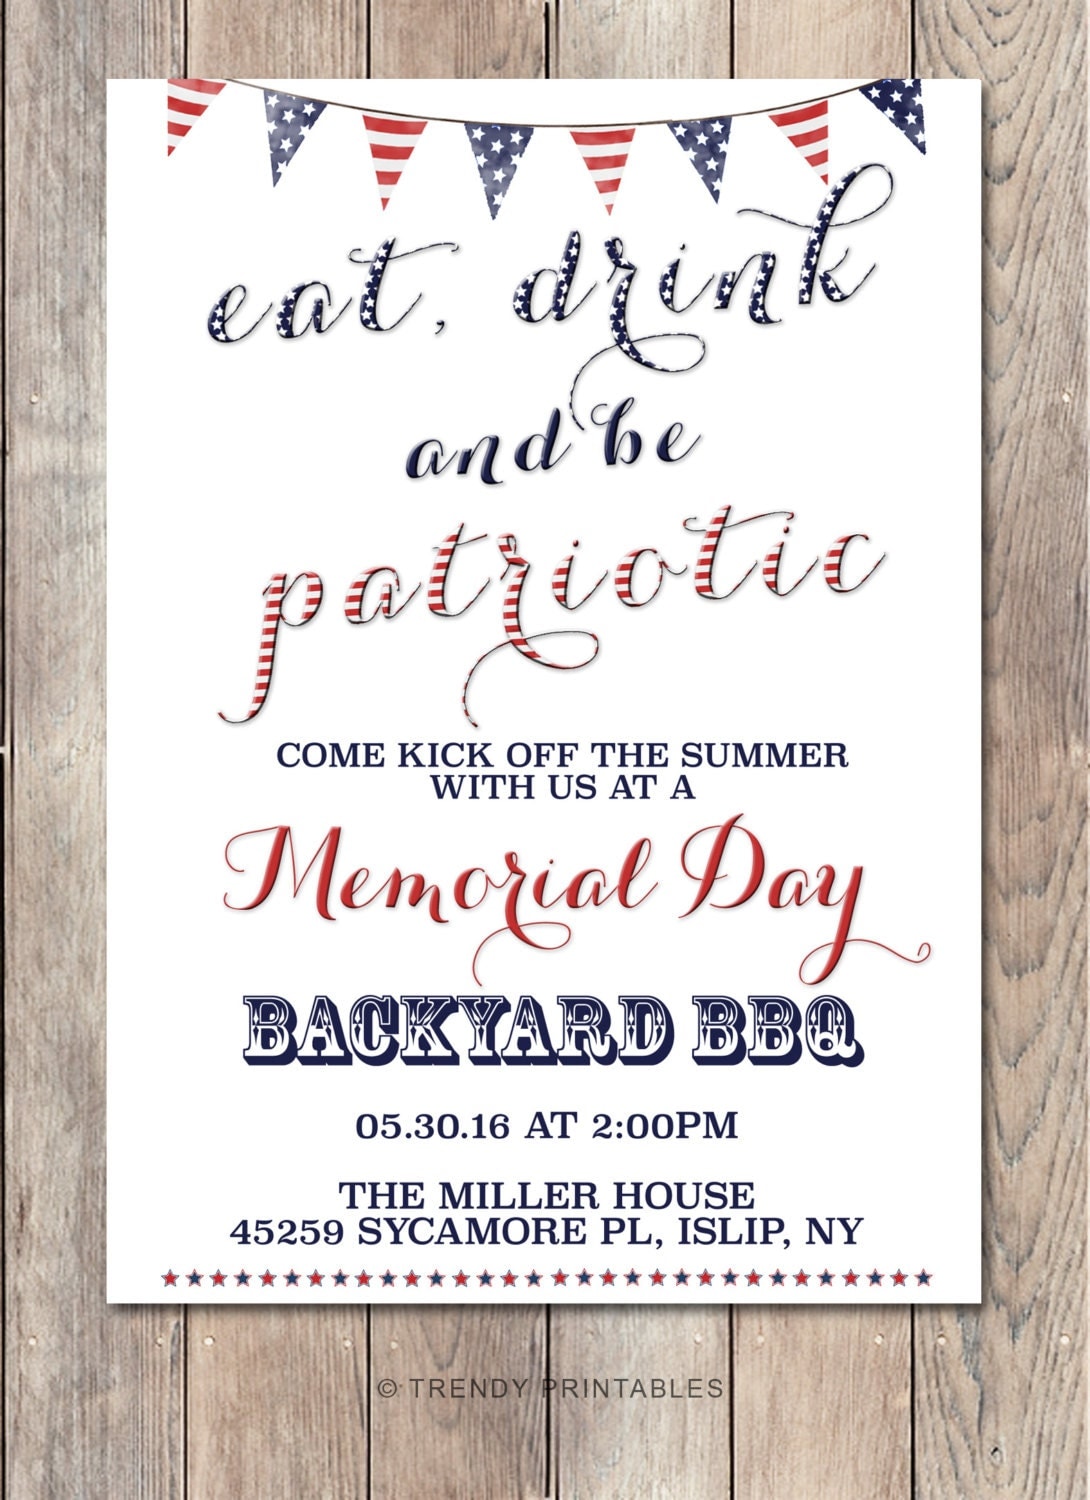 The Best Memorial Day Party Invitation - Home, Family, Style and Art Ideas